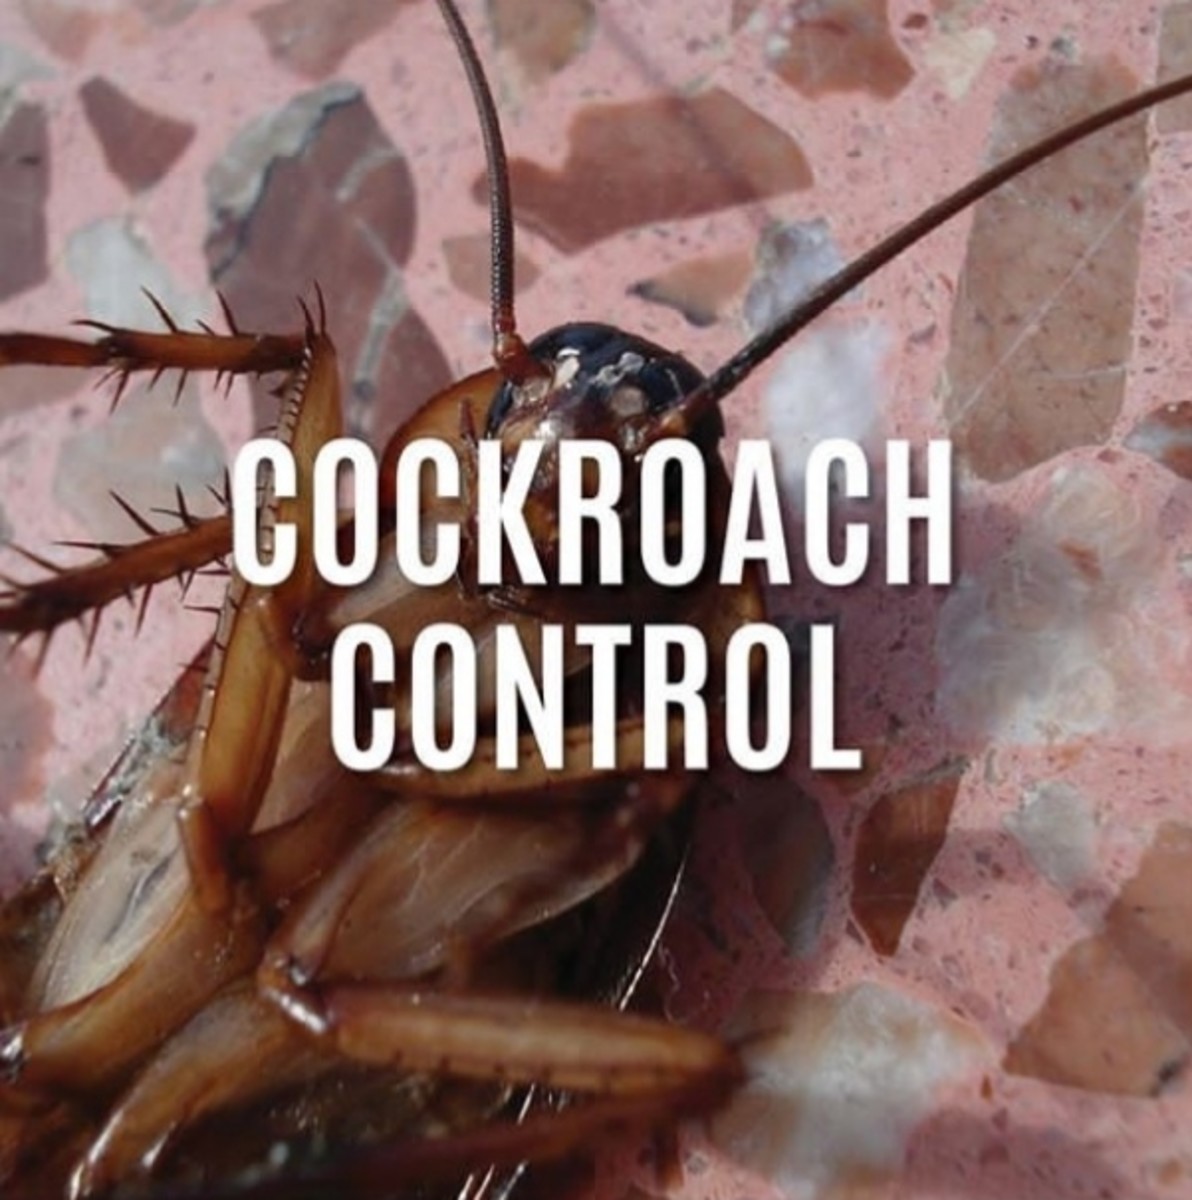 13 DIY Ideas to Get Rid of Cockroaches and Stop an Infestation